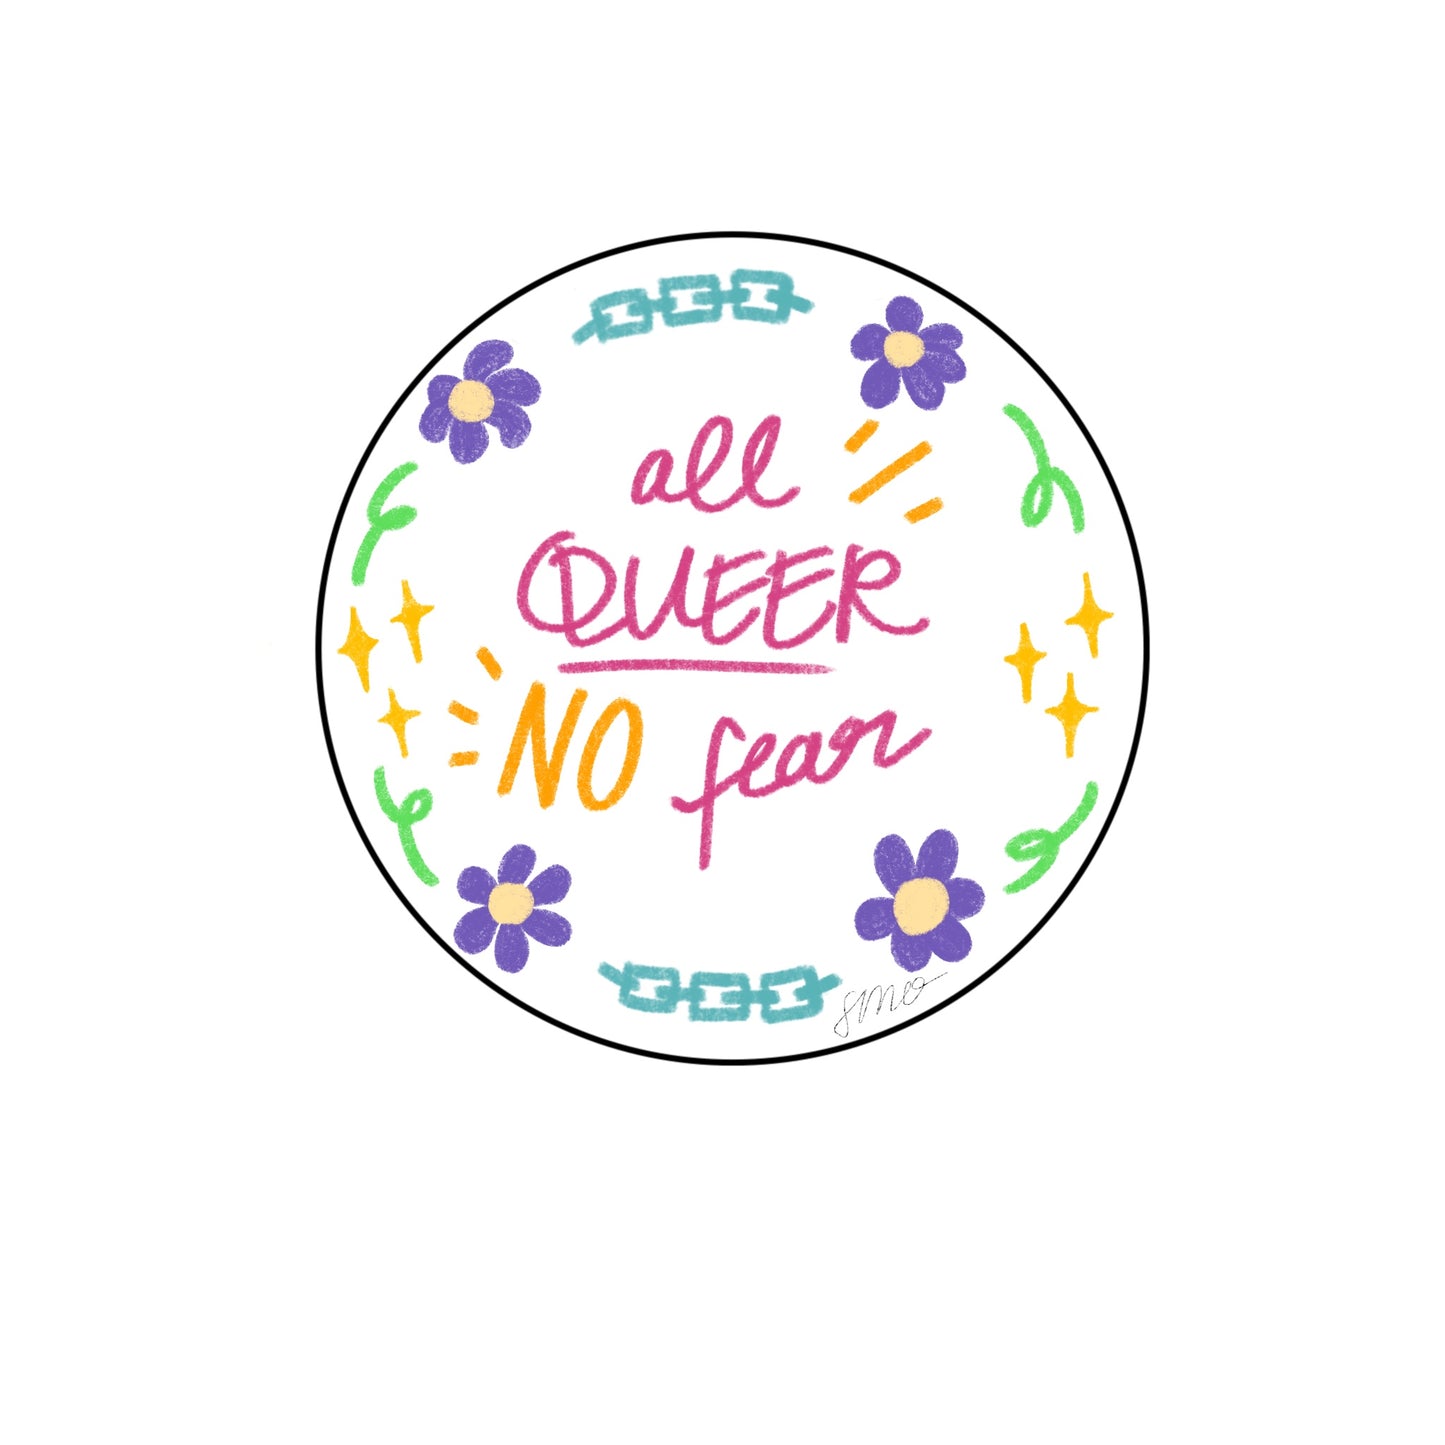 All queer no fear / all queer some fear - vinyl stickers